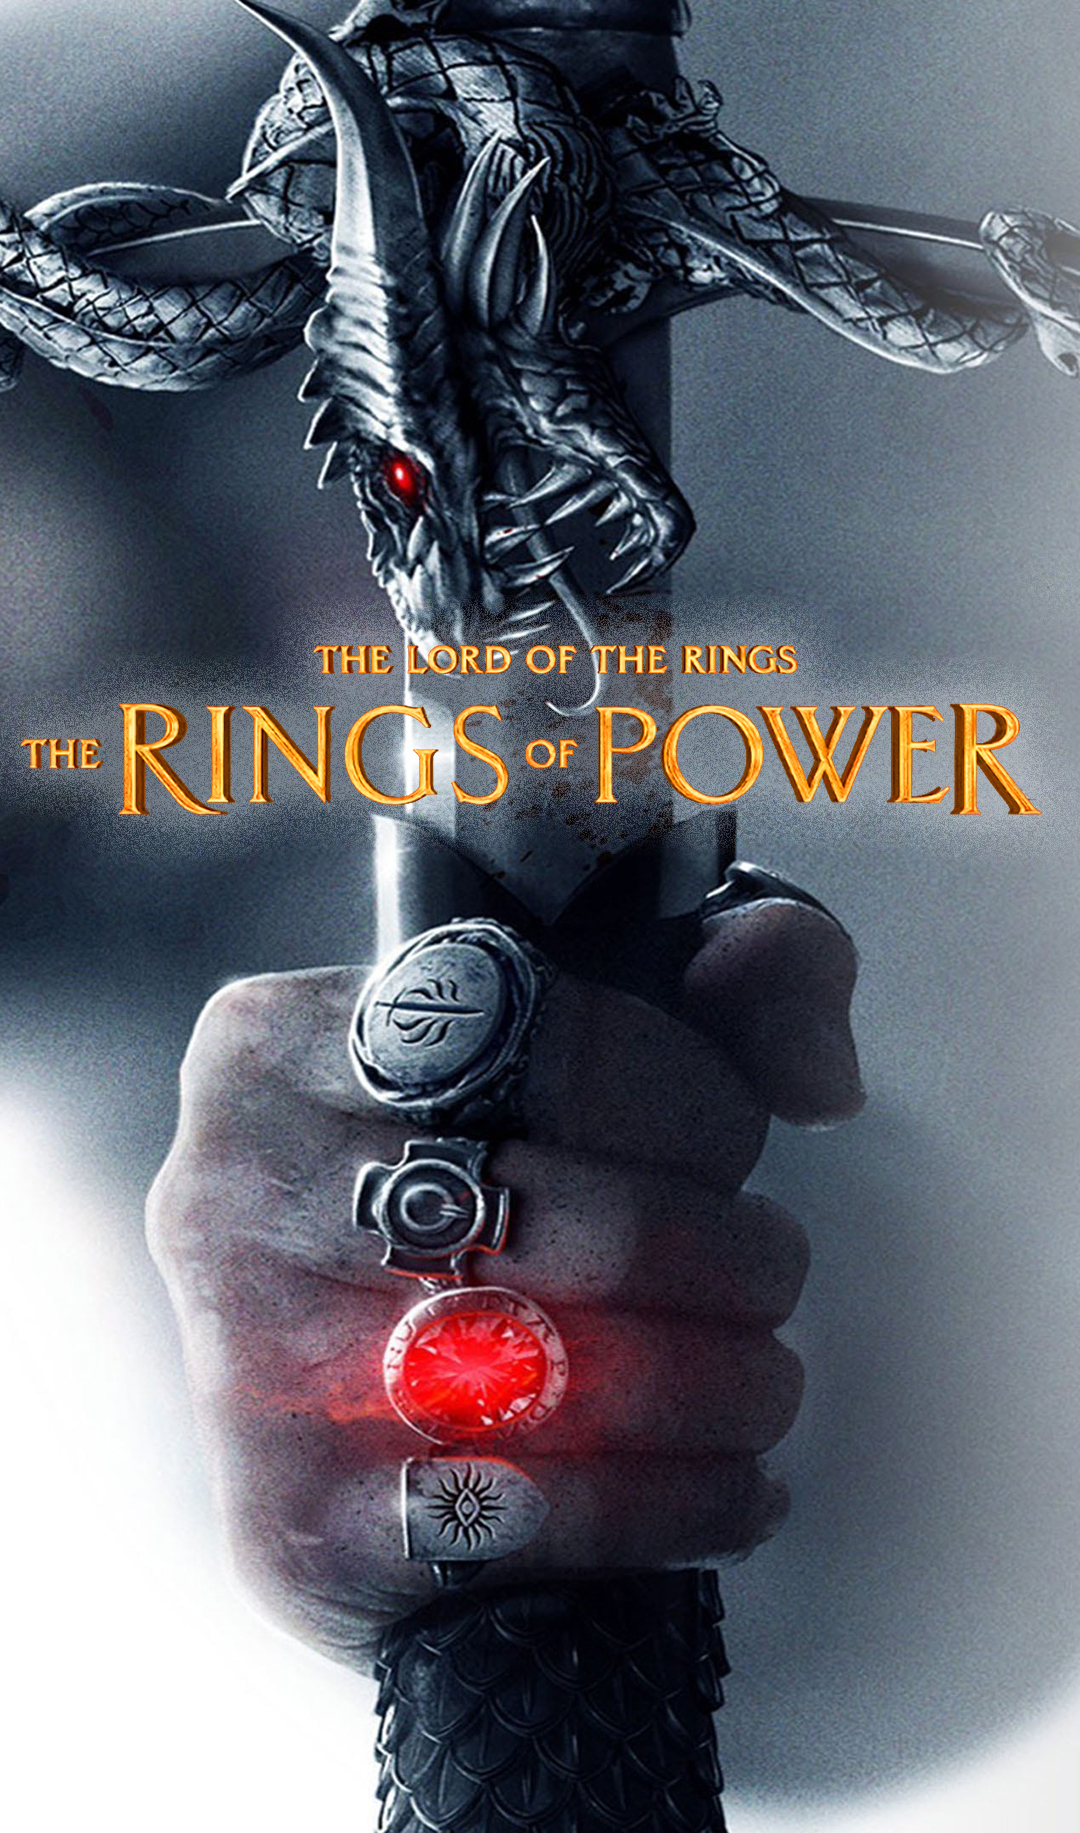 The rings of power Phone Wallpaper